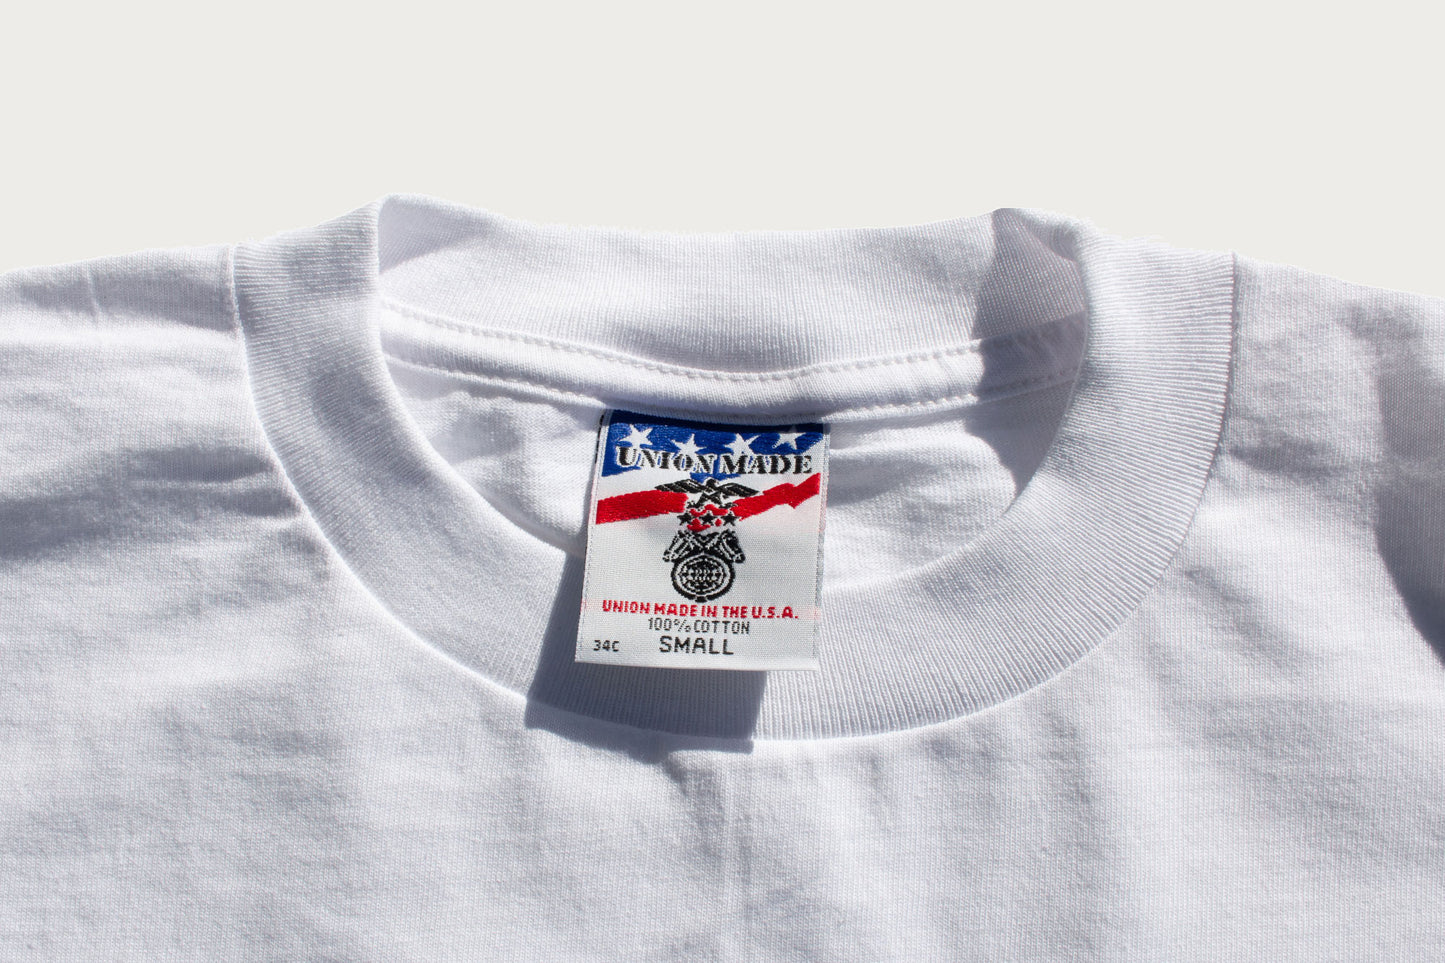 The Teamster Tee - Short-Sleeve White